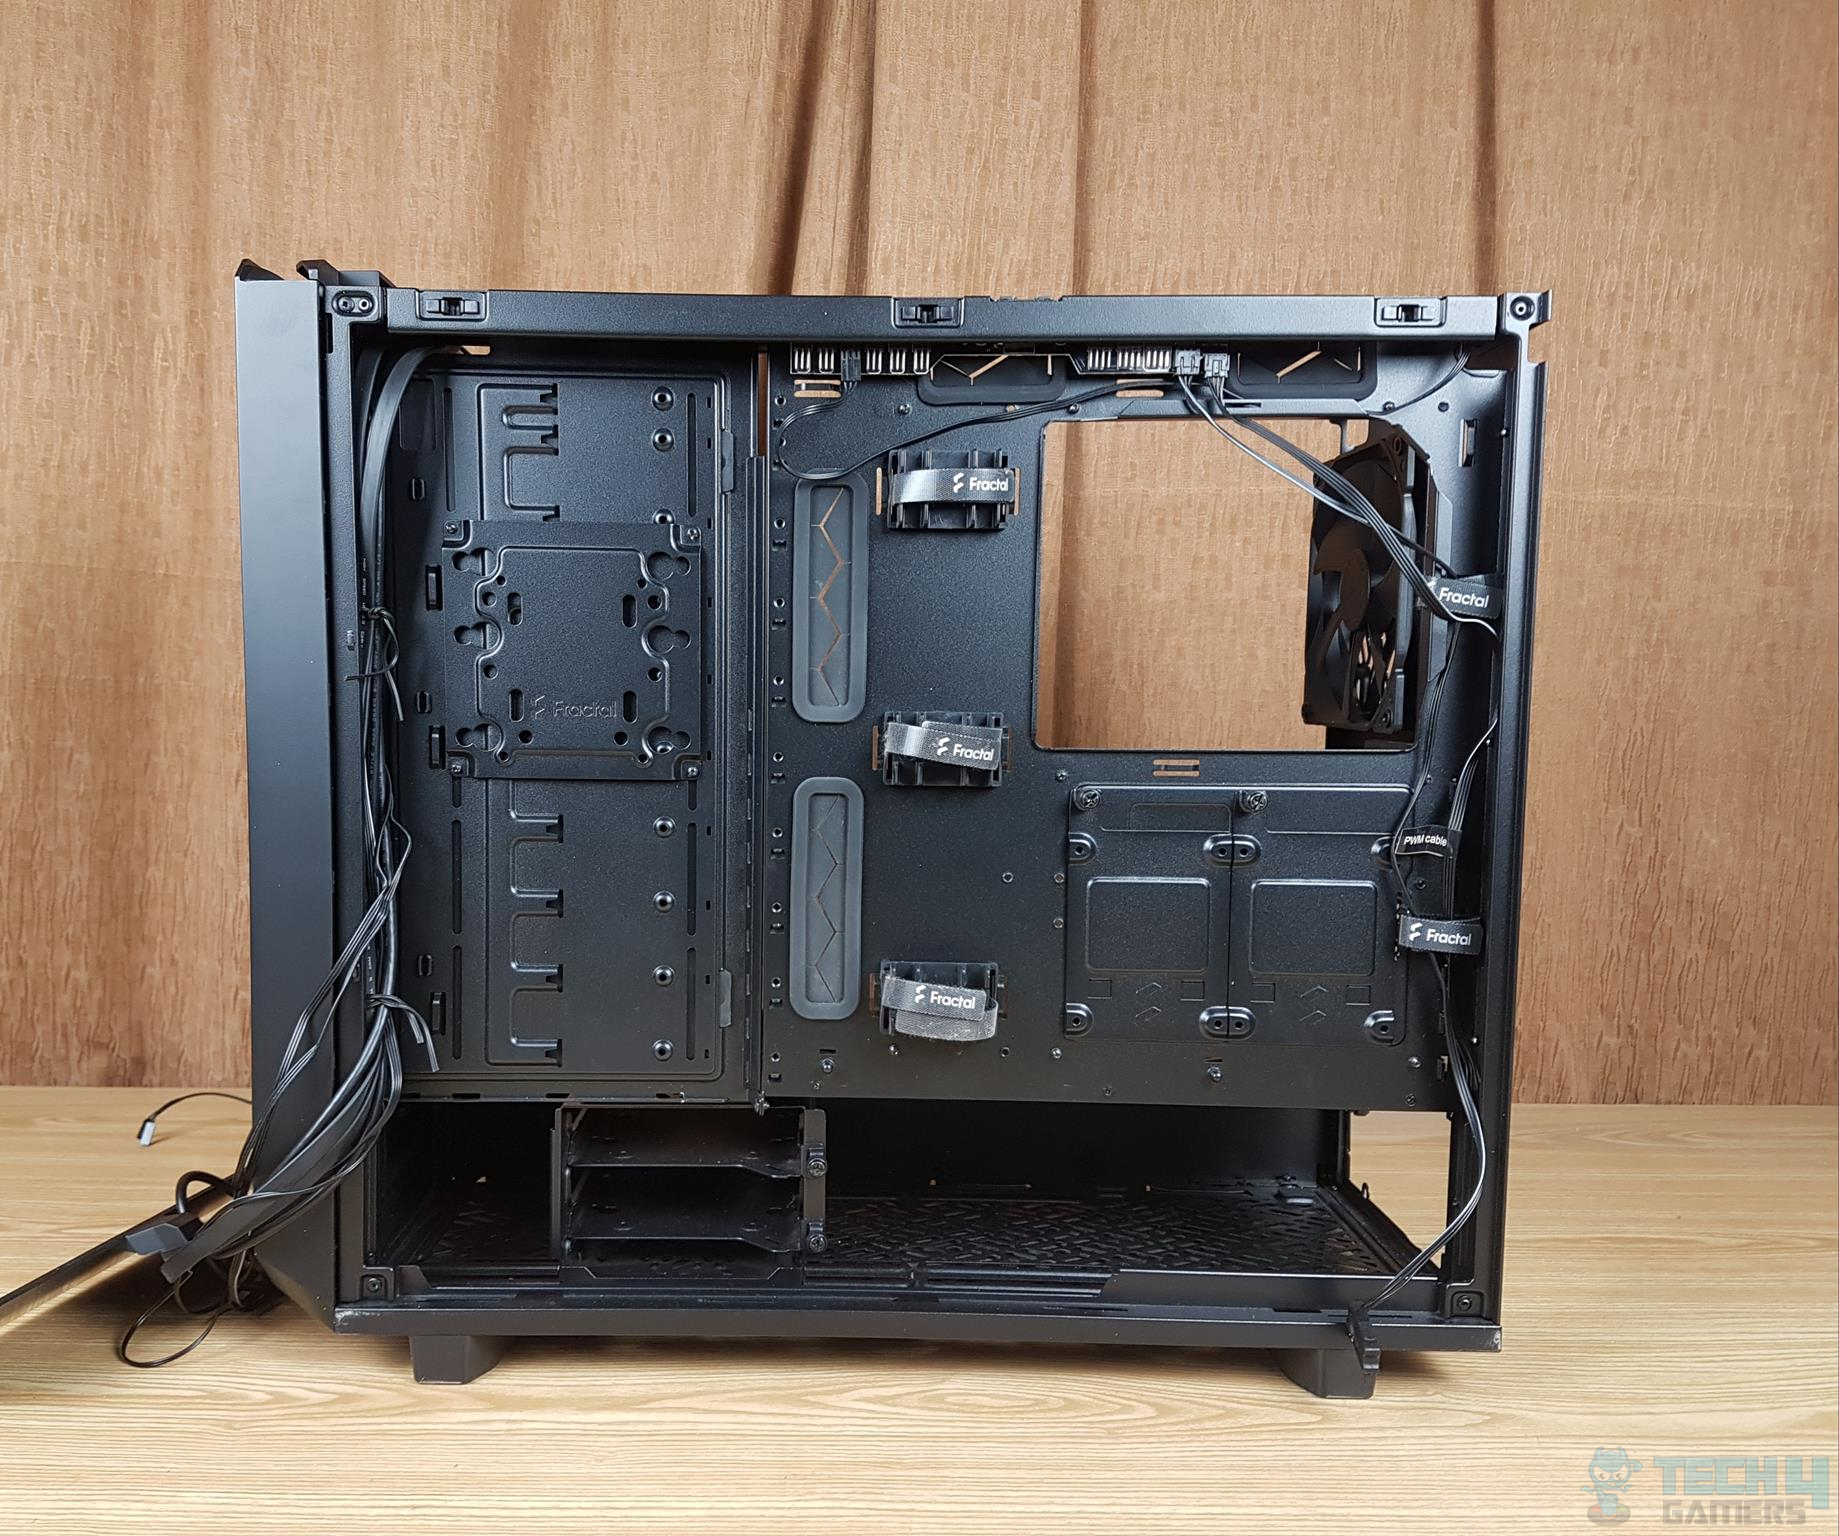 Fractal Design Meshify 2 — Back side with side panel and cover removed